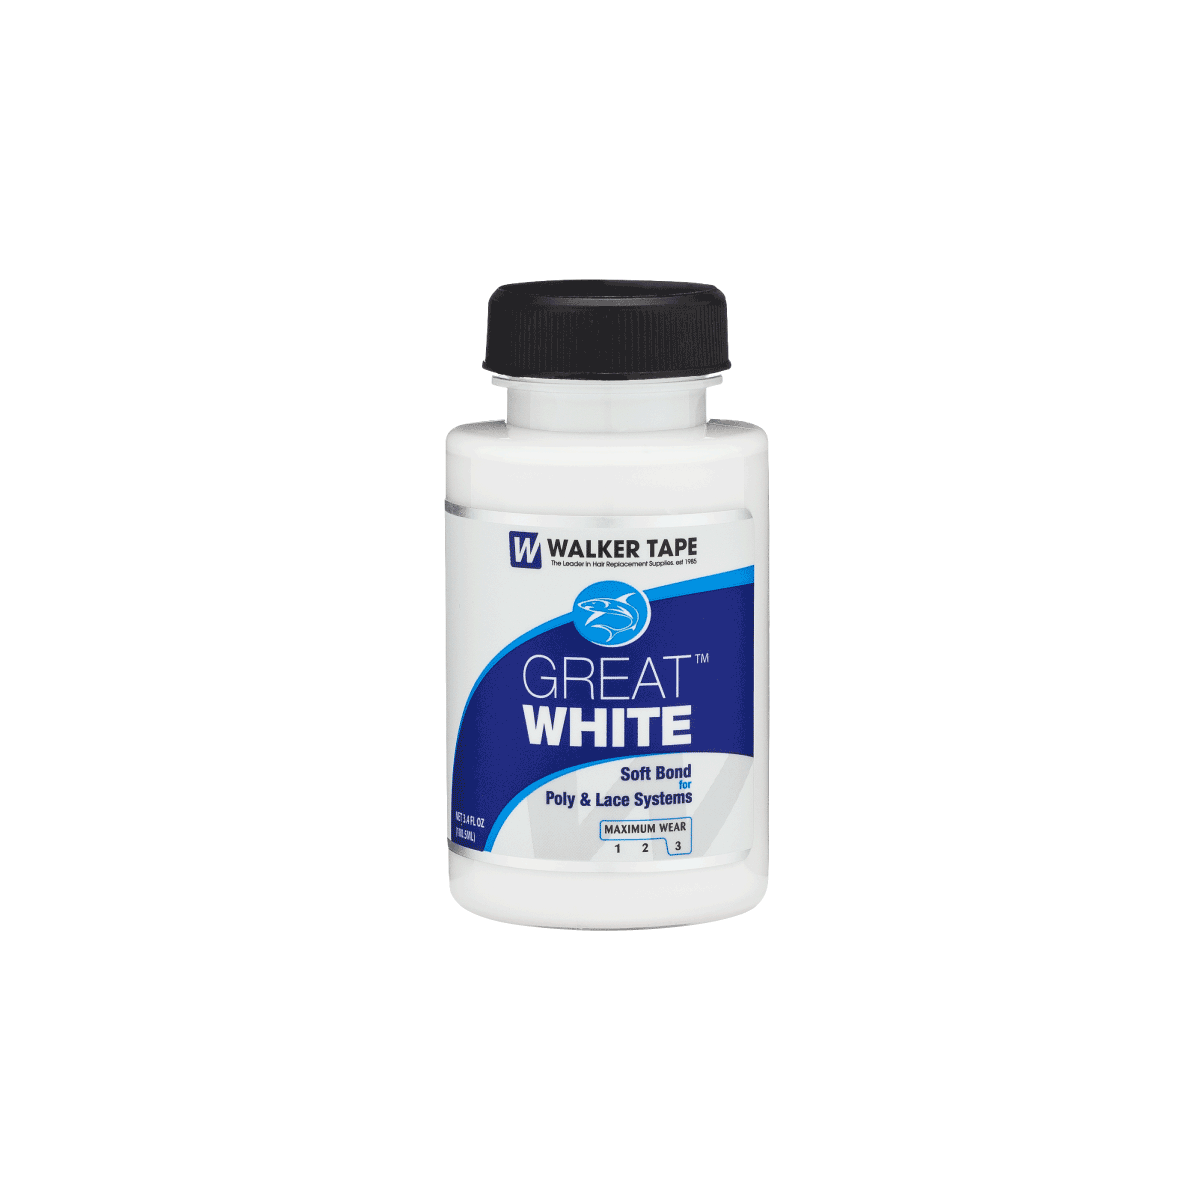 GREAT WHITE Soft Bond Adhesive for Poly & Lace Systems 3.4 oz.